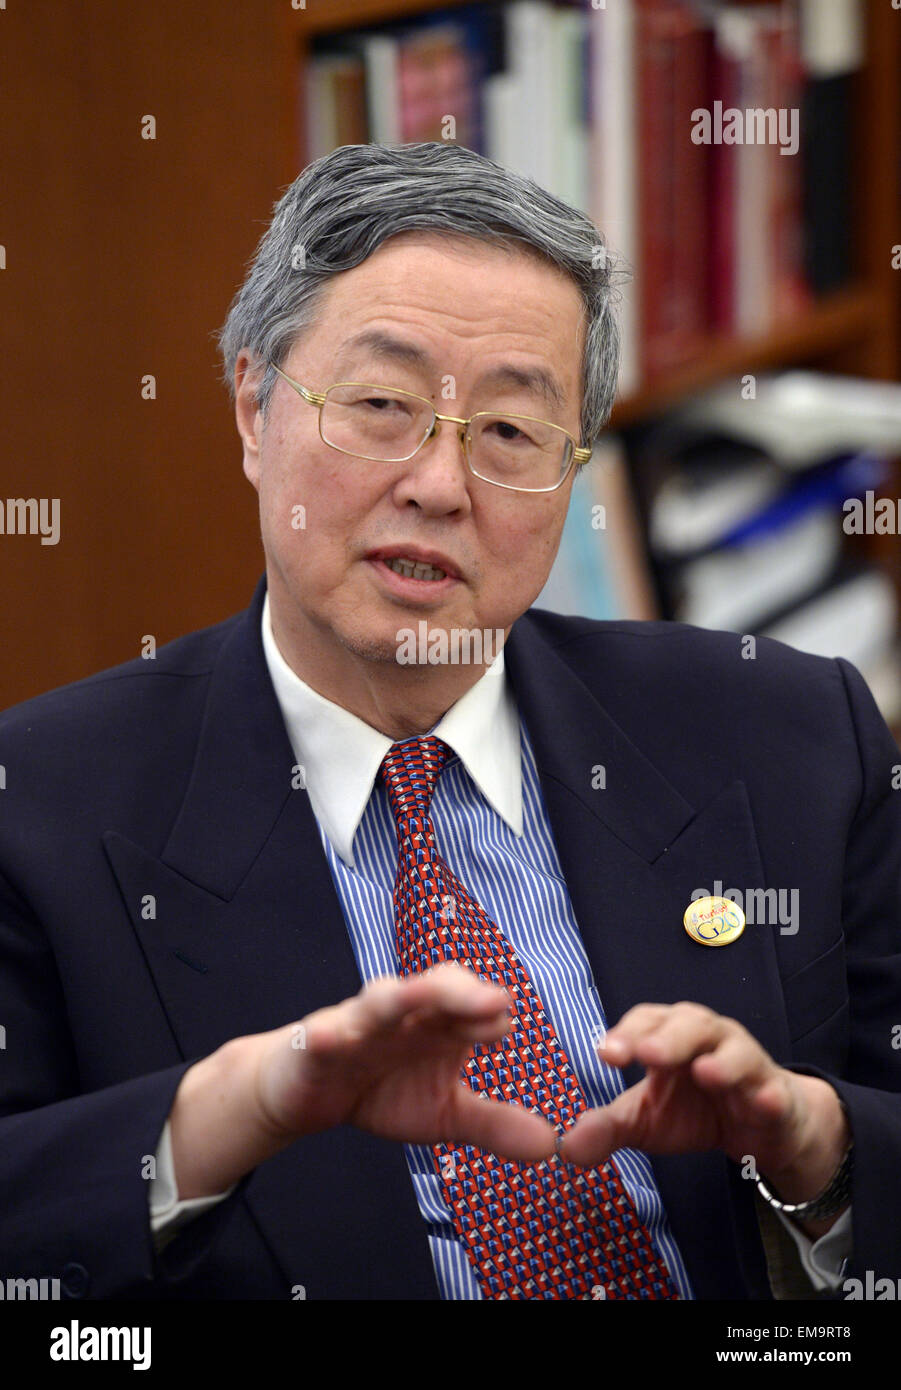 Washington, DC, USA. 17th Apr, 2015. China's central bank governor Zhou Xiaochuan speaks during an interview in Washington, DC, capital of the United States, April 17, 2015. Members of the International Monetary Fund (IMF) are frustrated with the long-delayed 2010 quota reform of the fund and called for early passage of the reform, said Zhou here Friday. © Yin Bogu/Xinhua/Alamy Live News Stock Photo